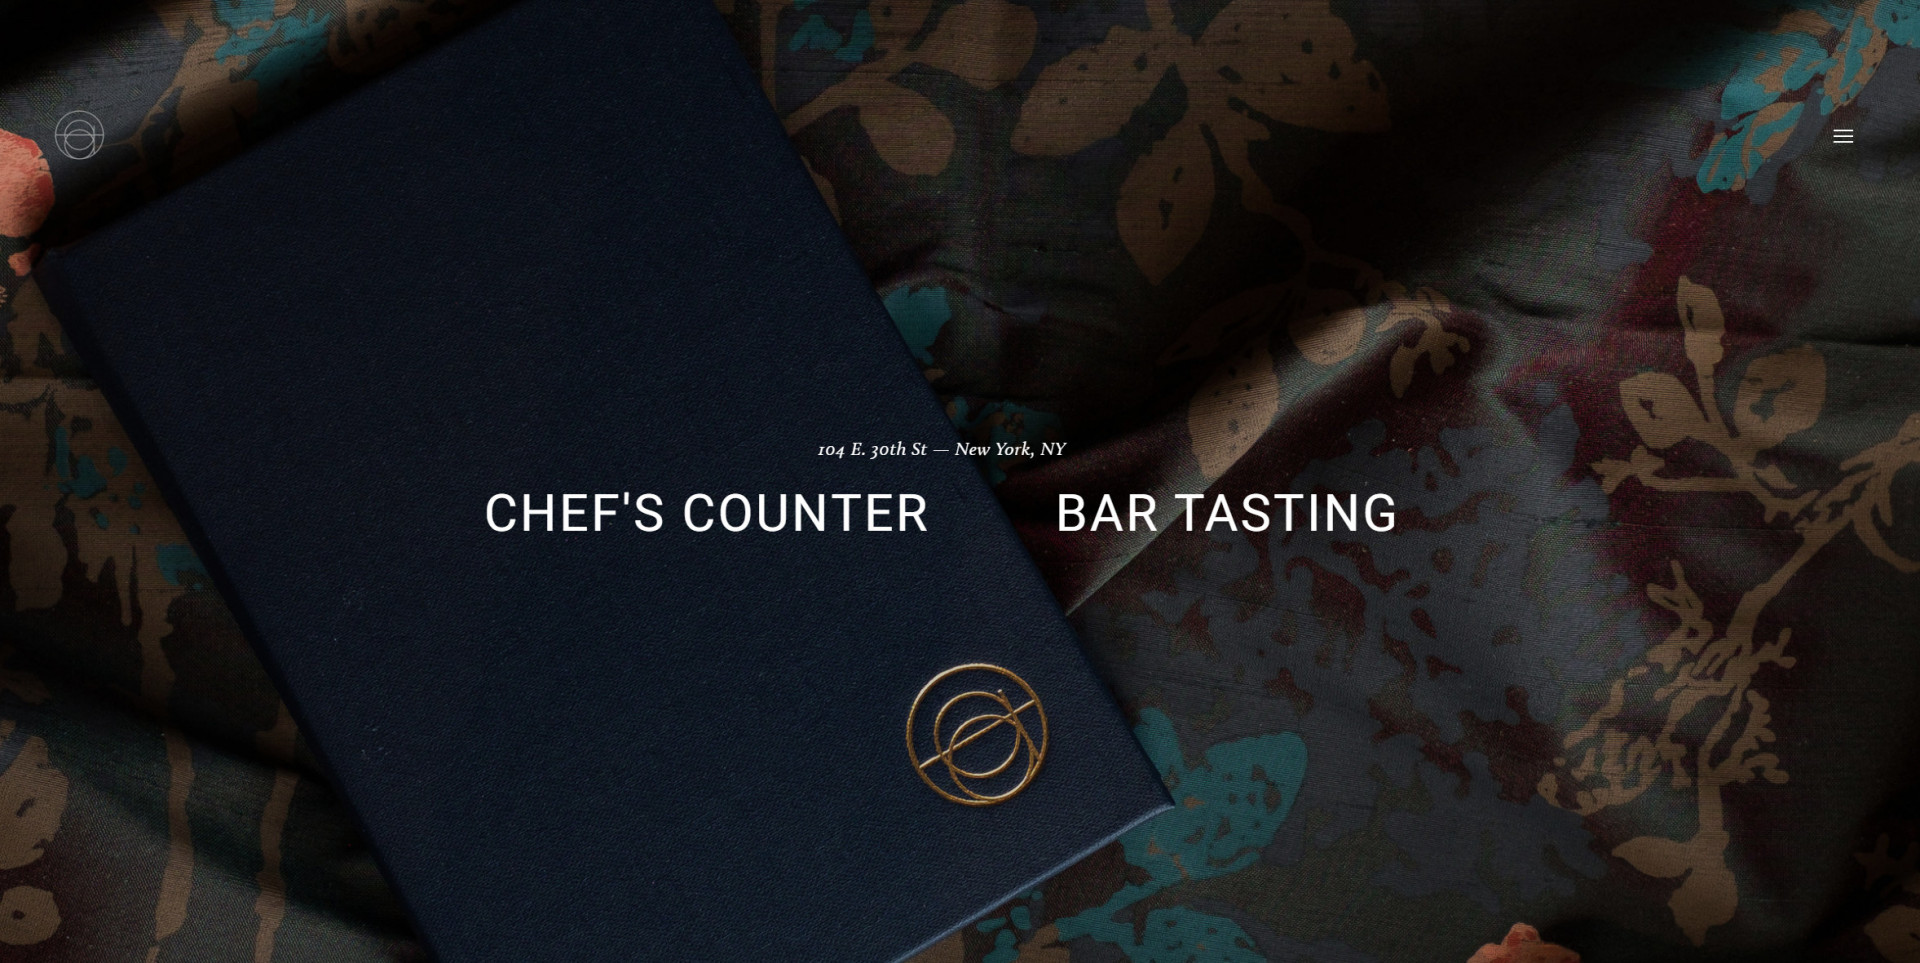 One of the best restaurant websites for bars and fine dining